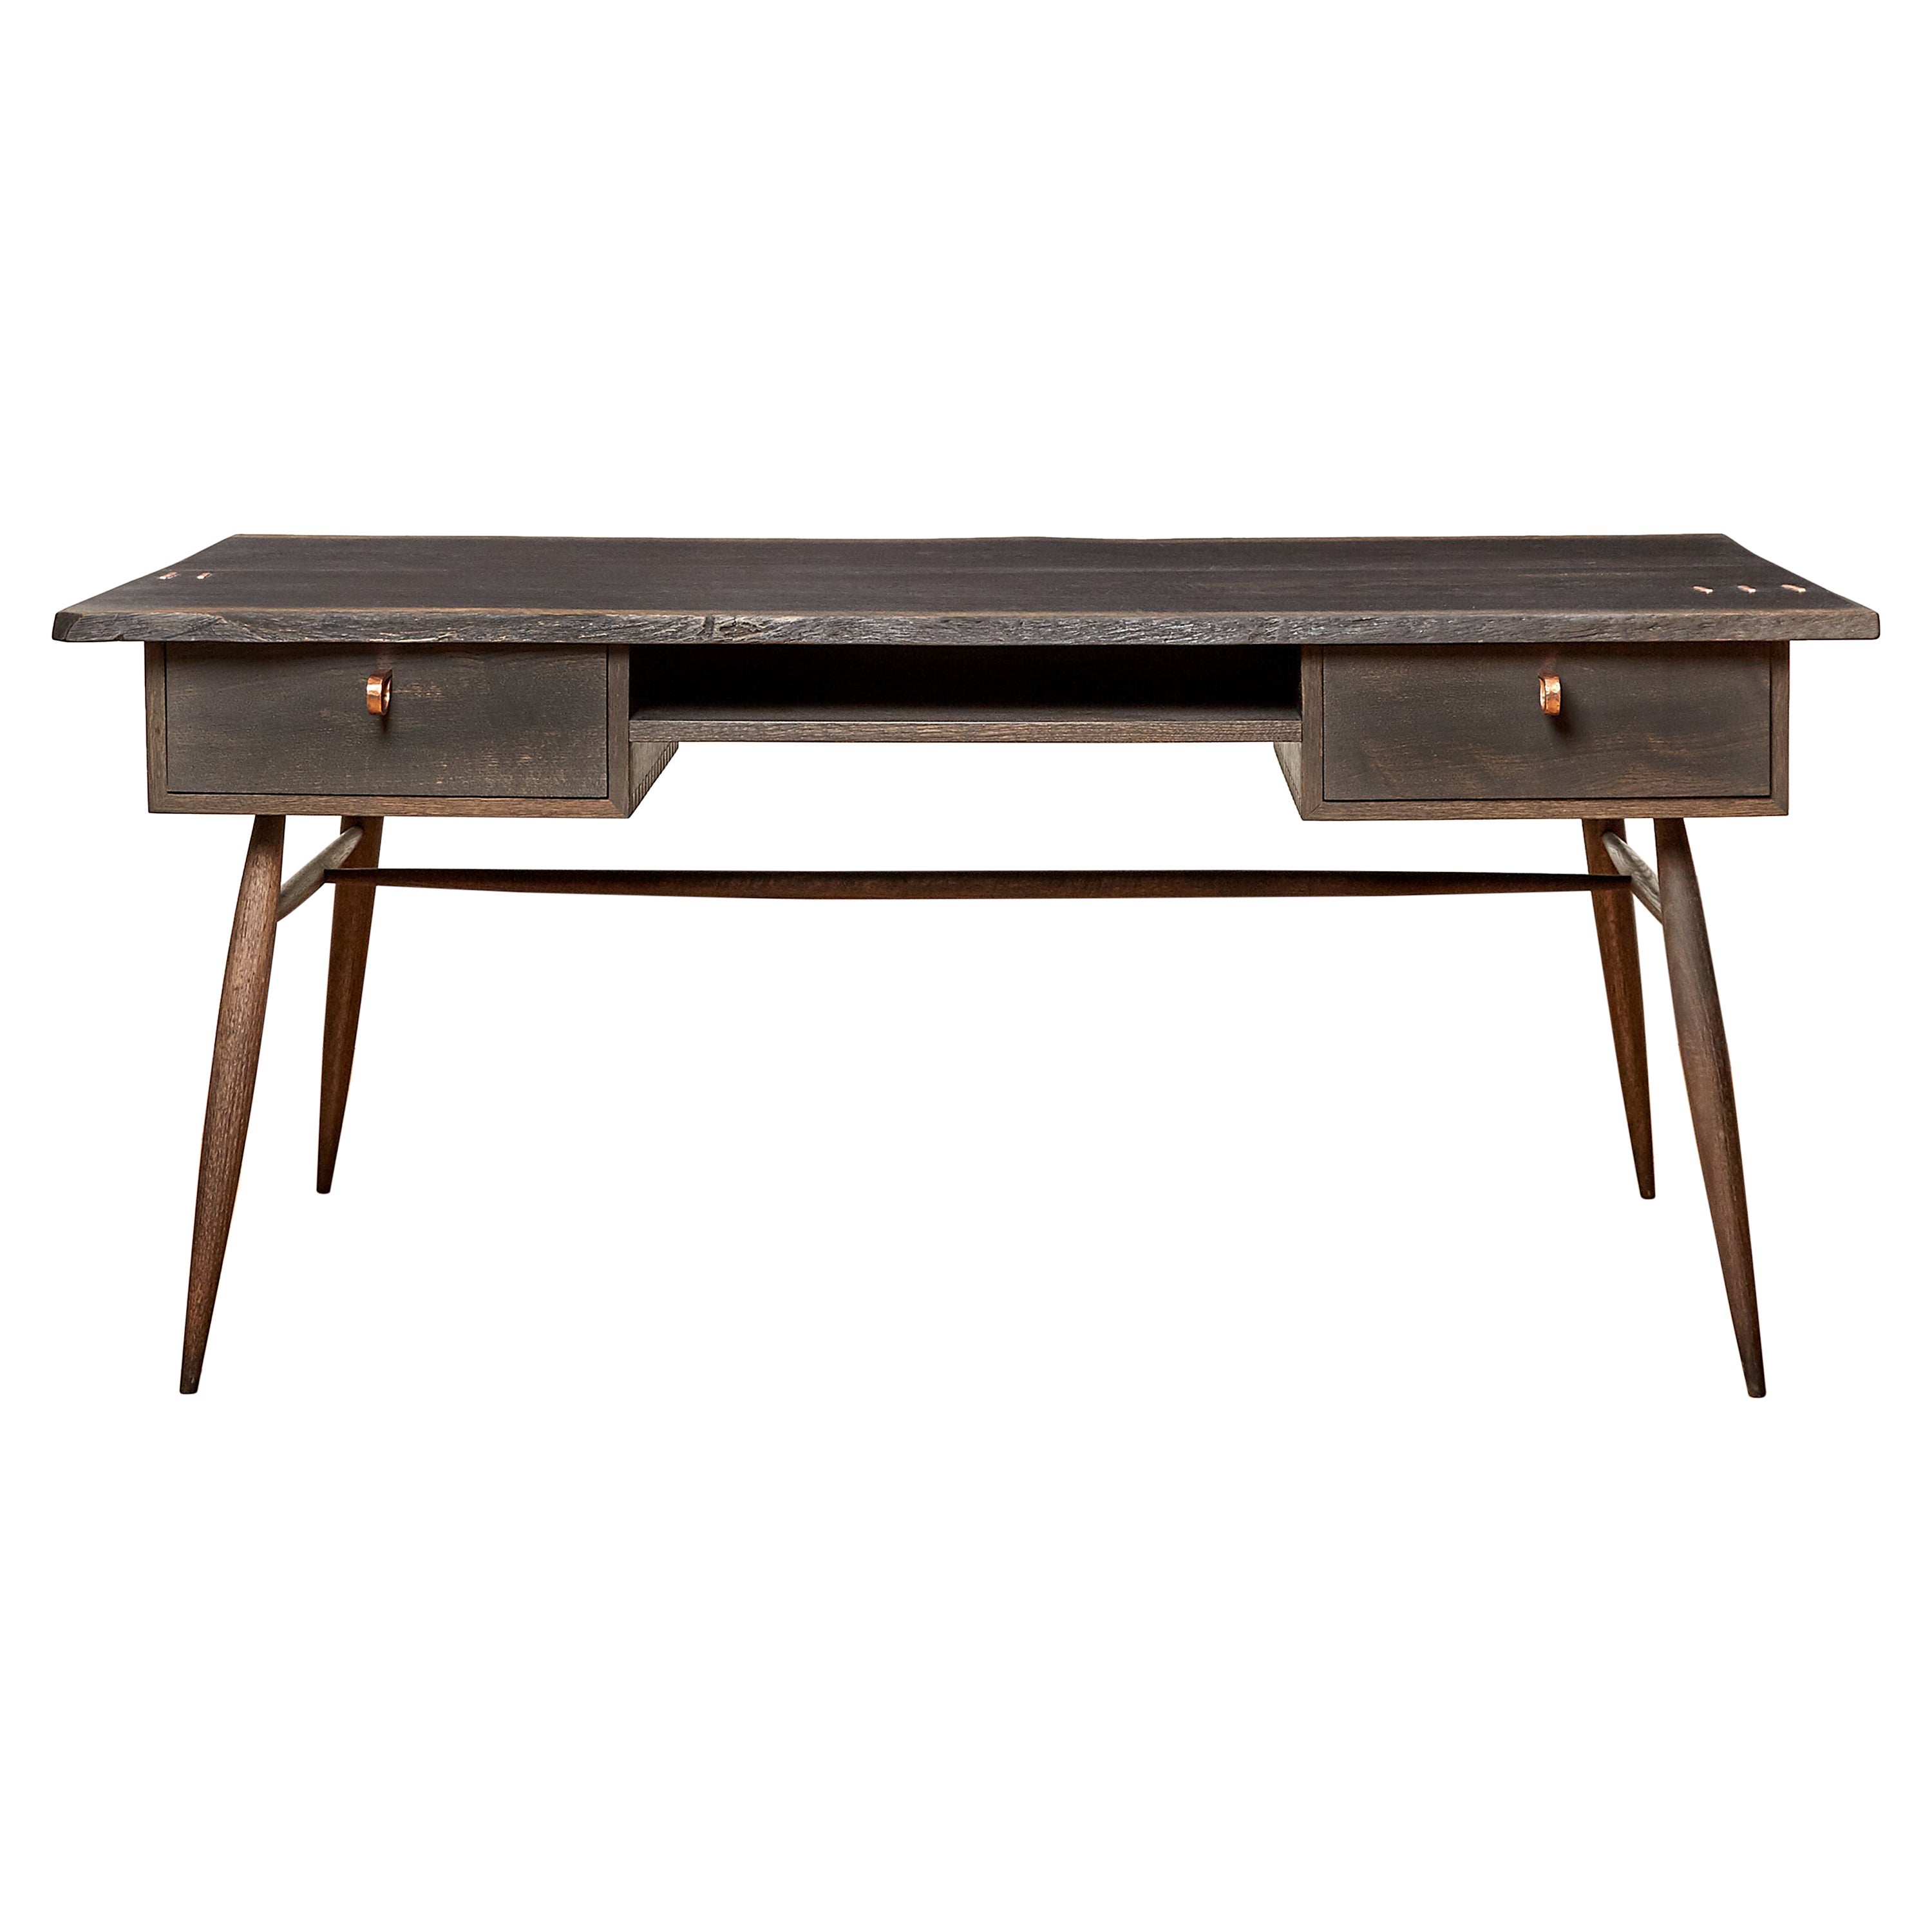 Handcrafted Sculptural Blackened Oak Desk with Copper Staples